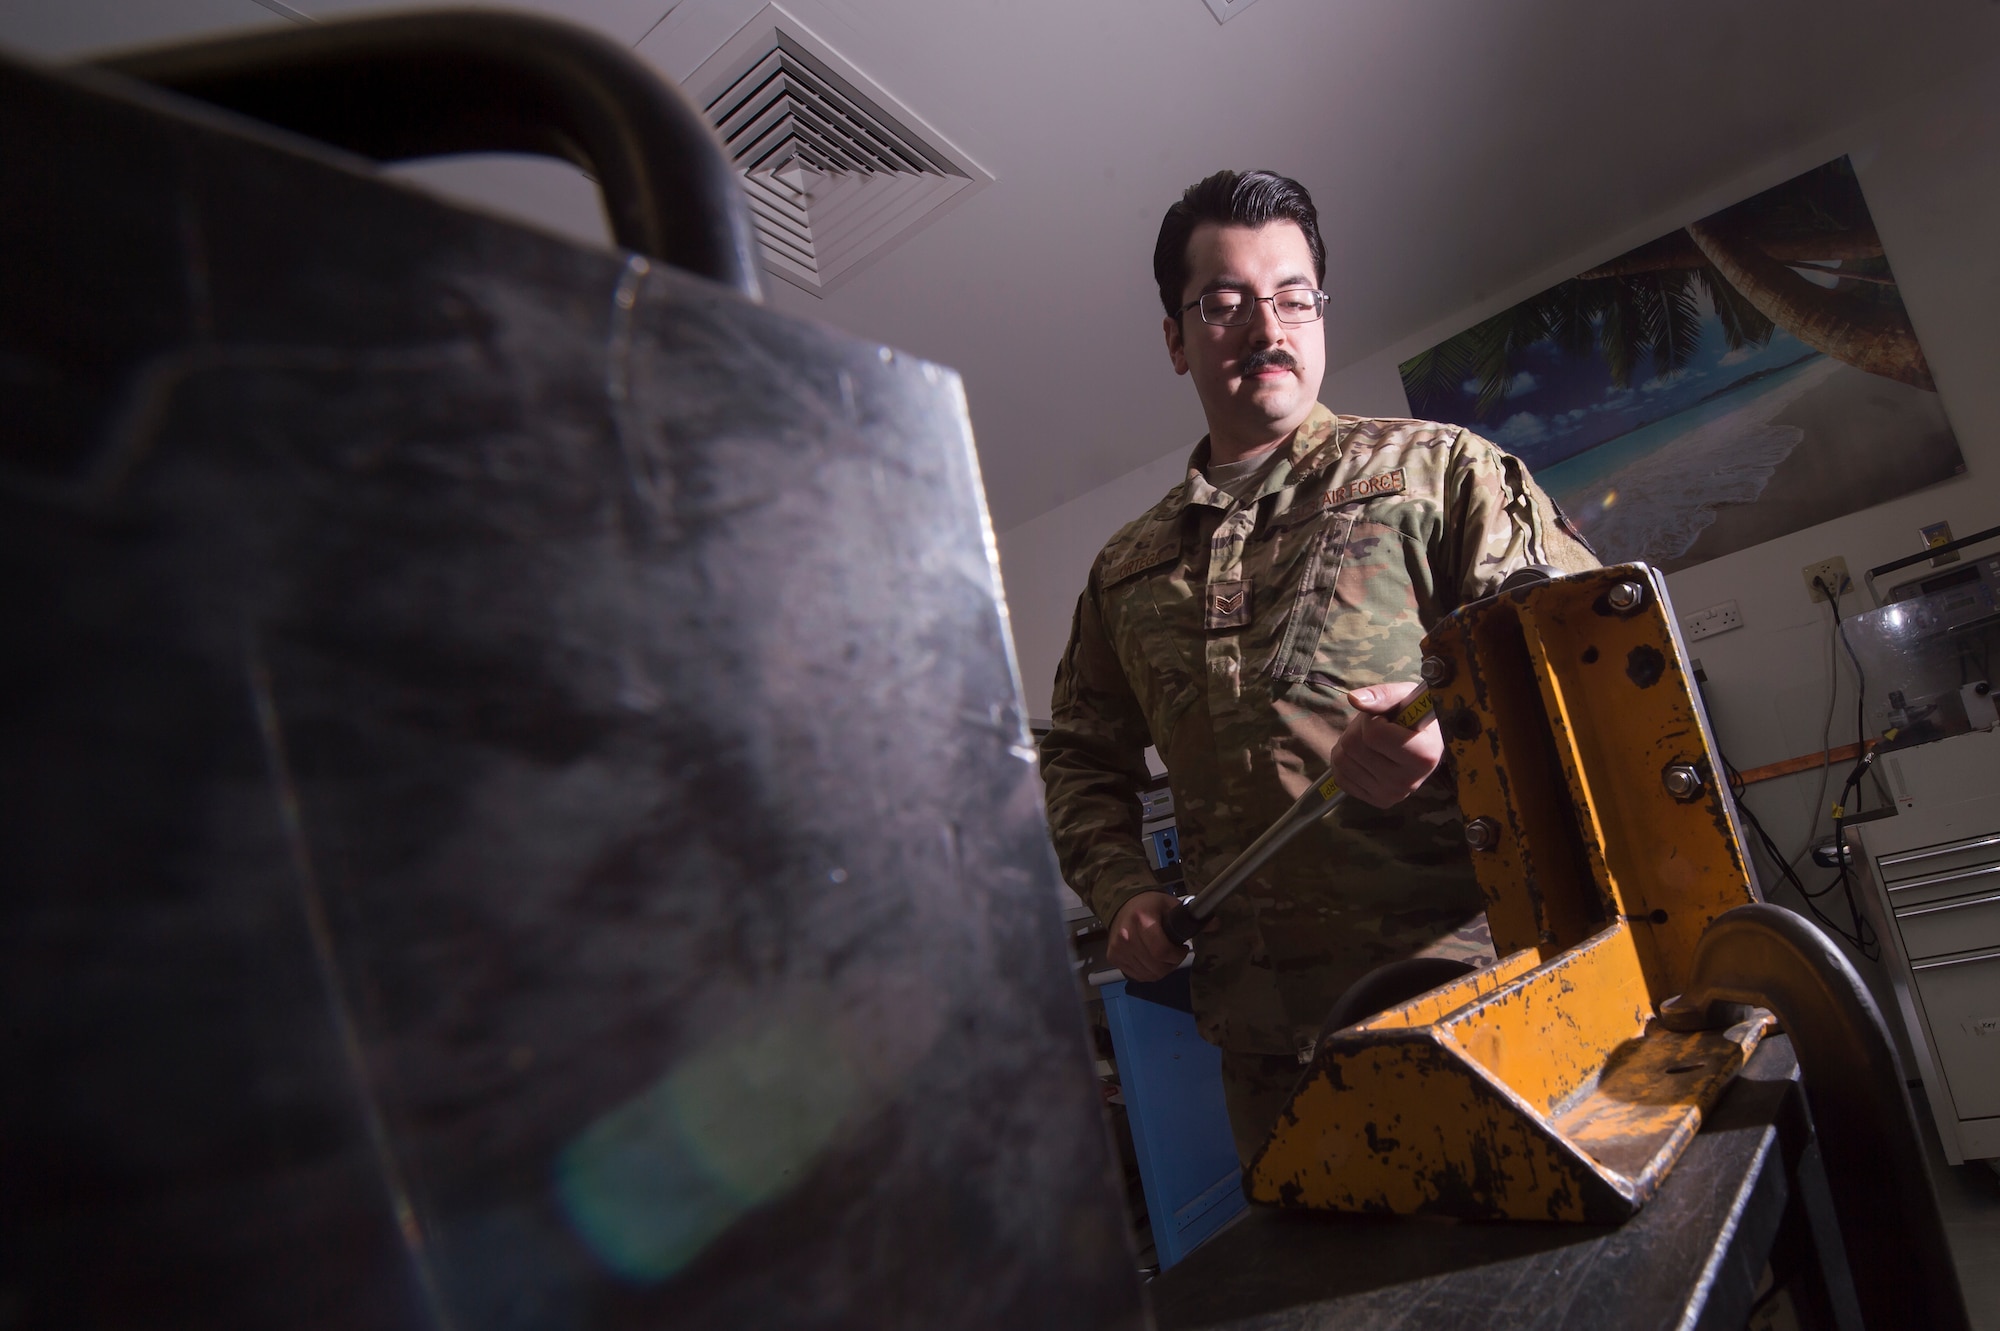 Senior Airman Javier Ortega, 379th Expeditionary Maintenance Squadron (EMXS) precision measurement equipment laboratory (PMEL) test, measurement and diagnostic equipment (TMDE) technician, calibrates a torque wrench Jan. 25, 2019, at Al Udeid Air Base, Qatar. The team supports approximately 14,000 pieces of TMDE and can forward deploy to locations throughout U.S. Air Forces Central Command to provide precise calibration for equipment that can’t be transported to Al Udeid. (U.S. Air Force Tech. Sgt. Christopher Hubenthal)